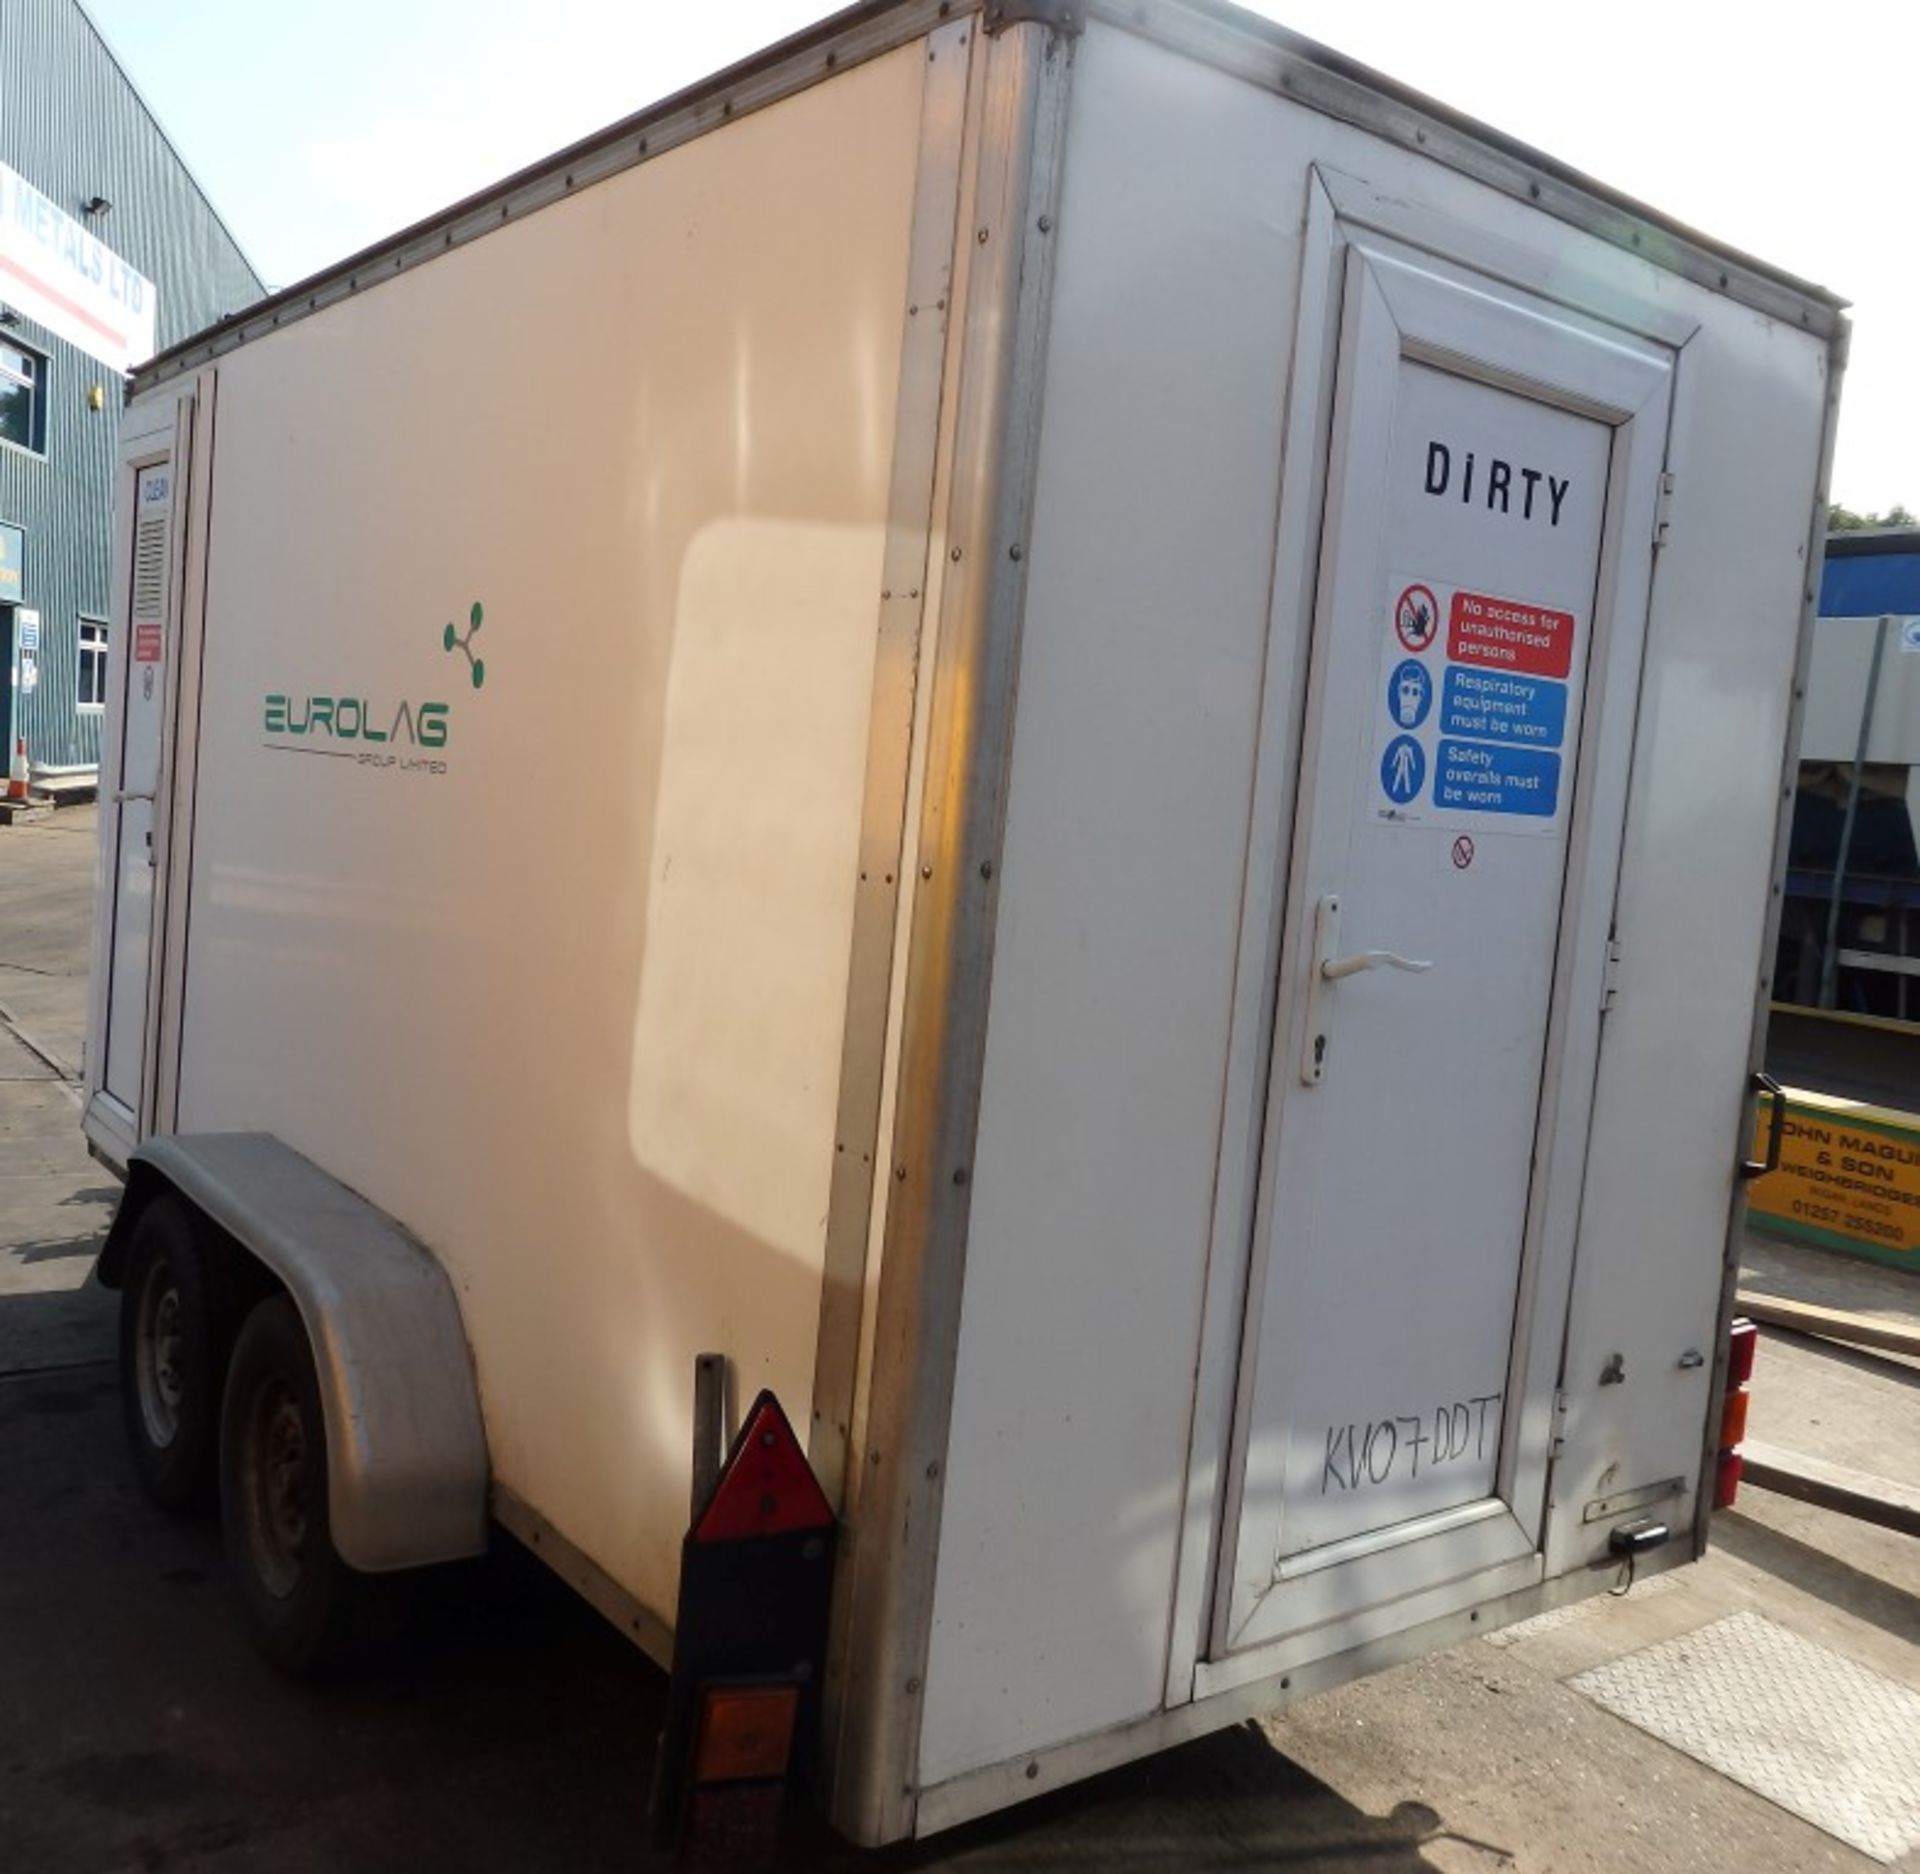 1 x Eurolag Towing Trailer With In and Out Shower Facility - Previously Used As Decontamination Wash - Image 21 of 23